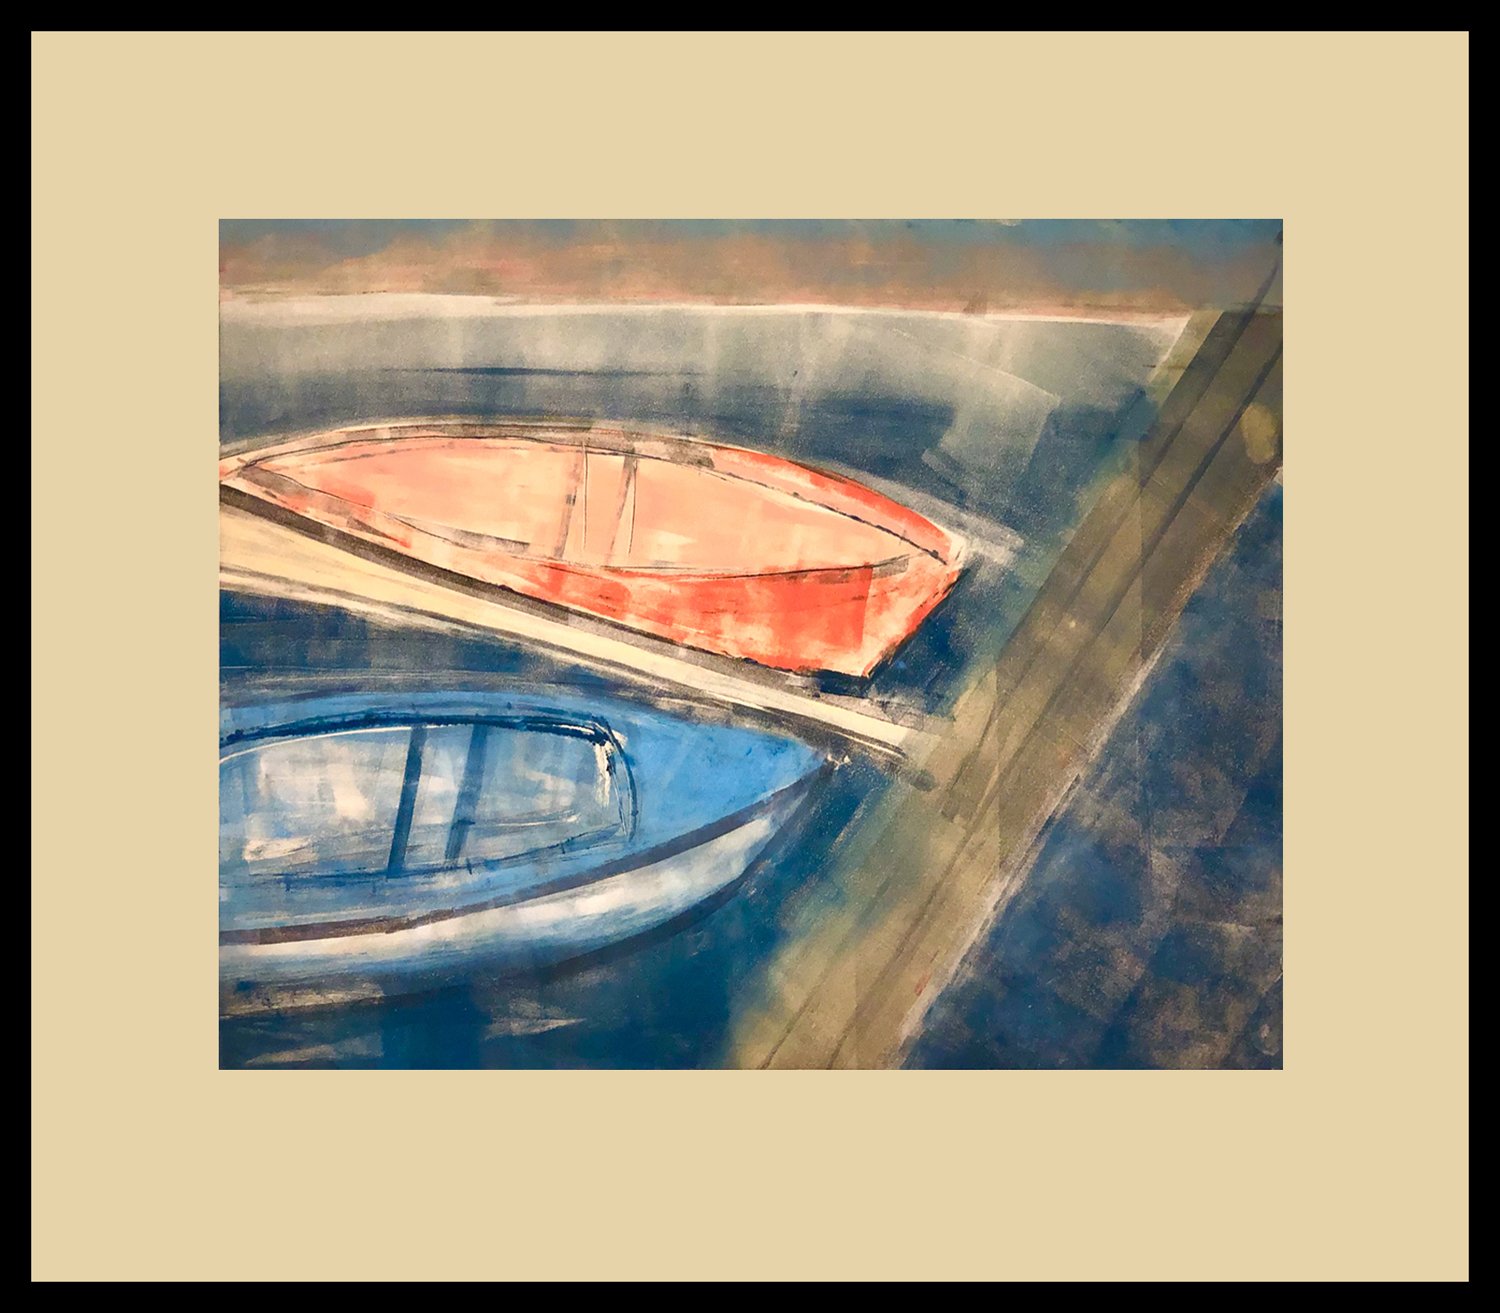    We’re in the Same Boat    Alluding to the risks of passengers in a small boat…at sea, at the dock or in life. If we work together the risk diminishes. Printed on cream BFK paper,  20 x 23” Custom Framed/Matted, Monotype, 1/1   $410 - SOLD  